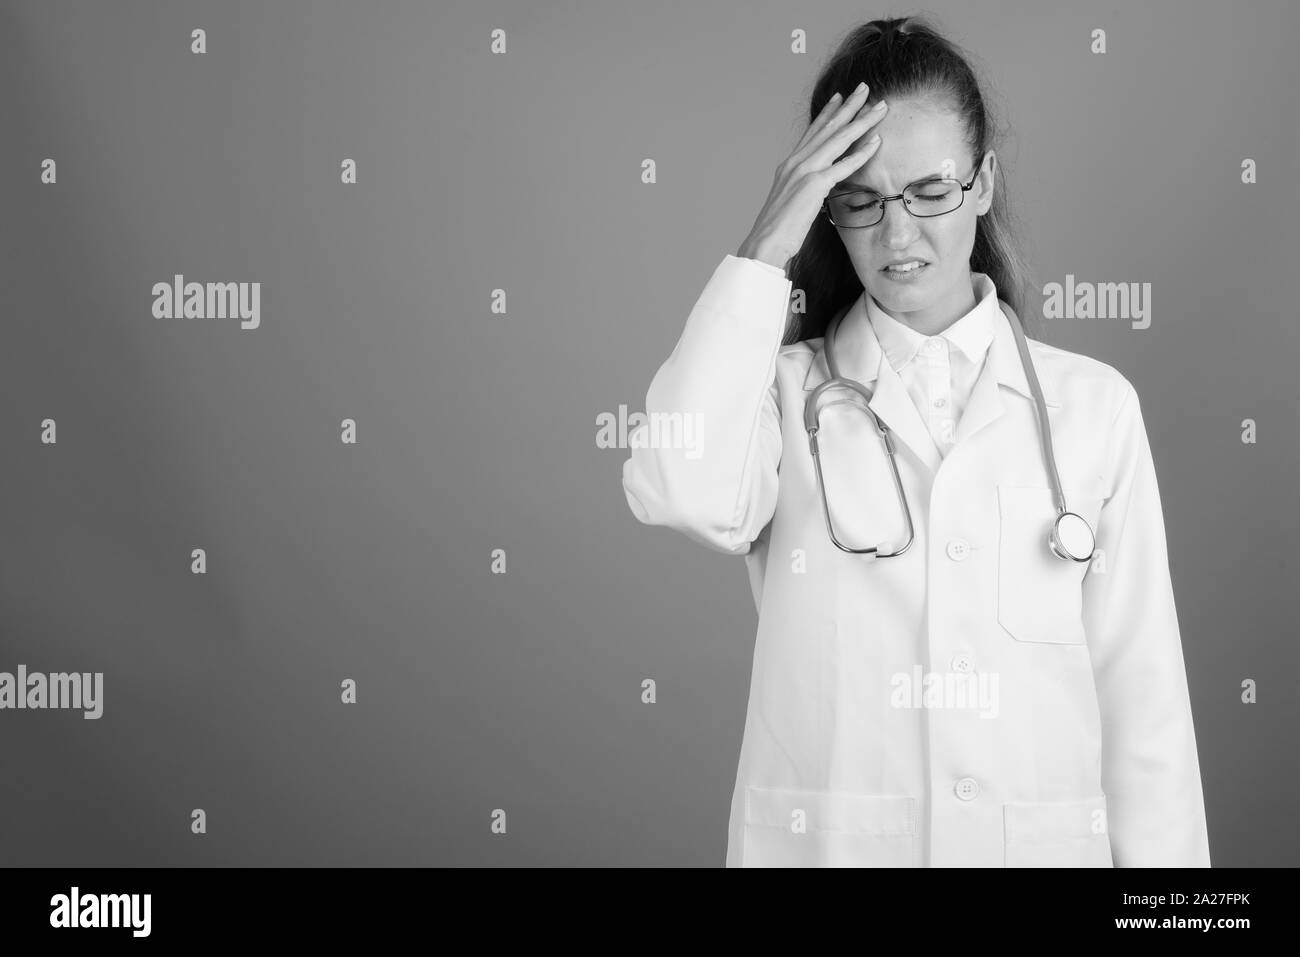 Stressed and sad woman doctor against gray background Stock Photo